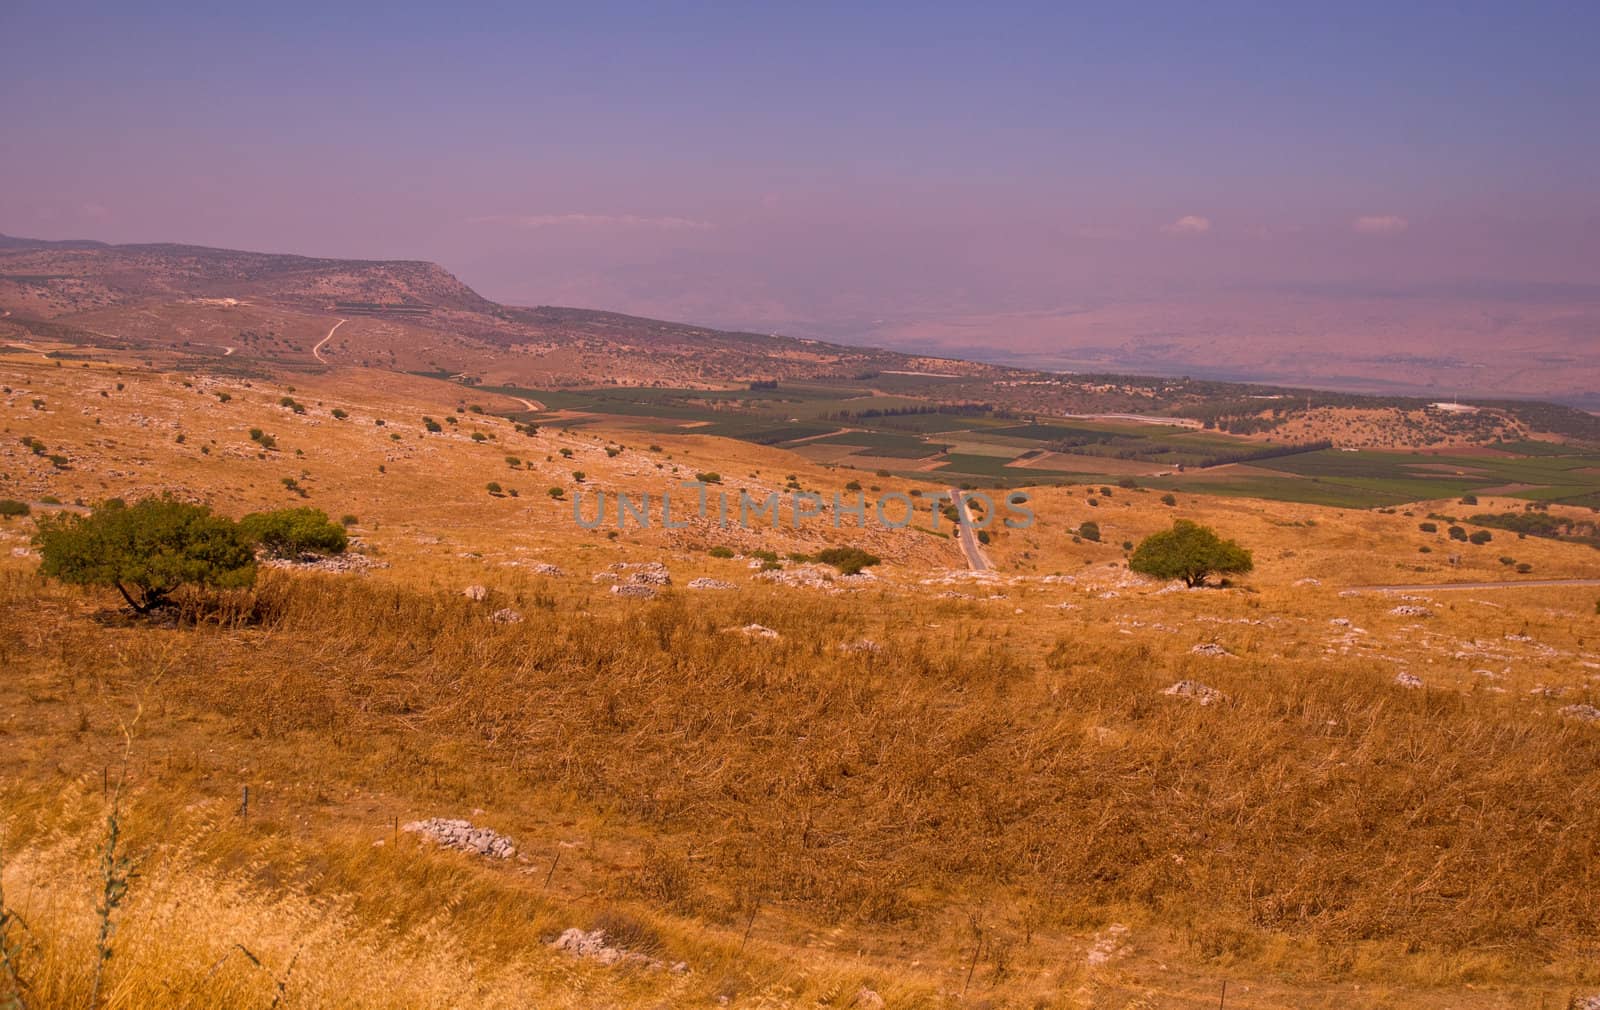 View of the Golan. North Israel.